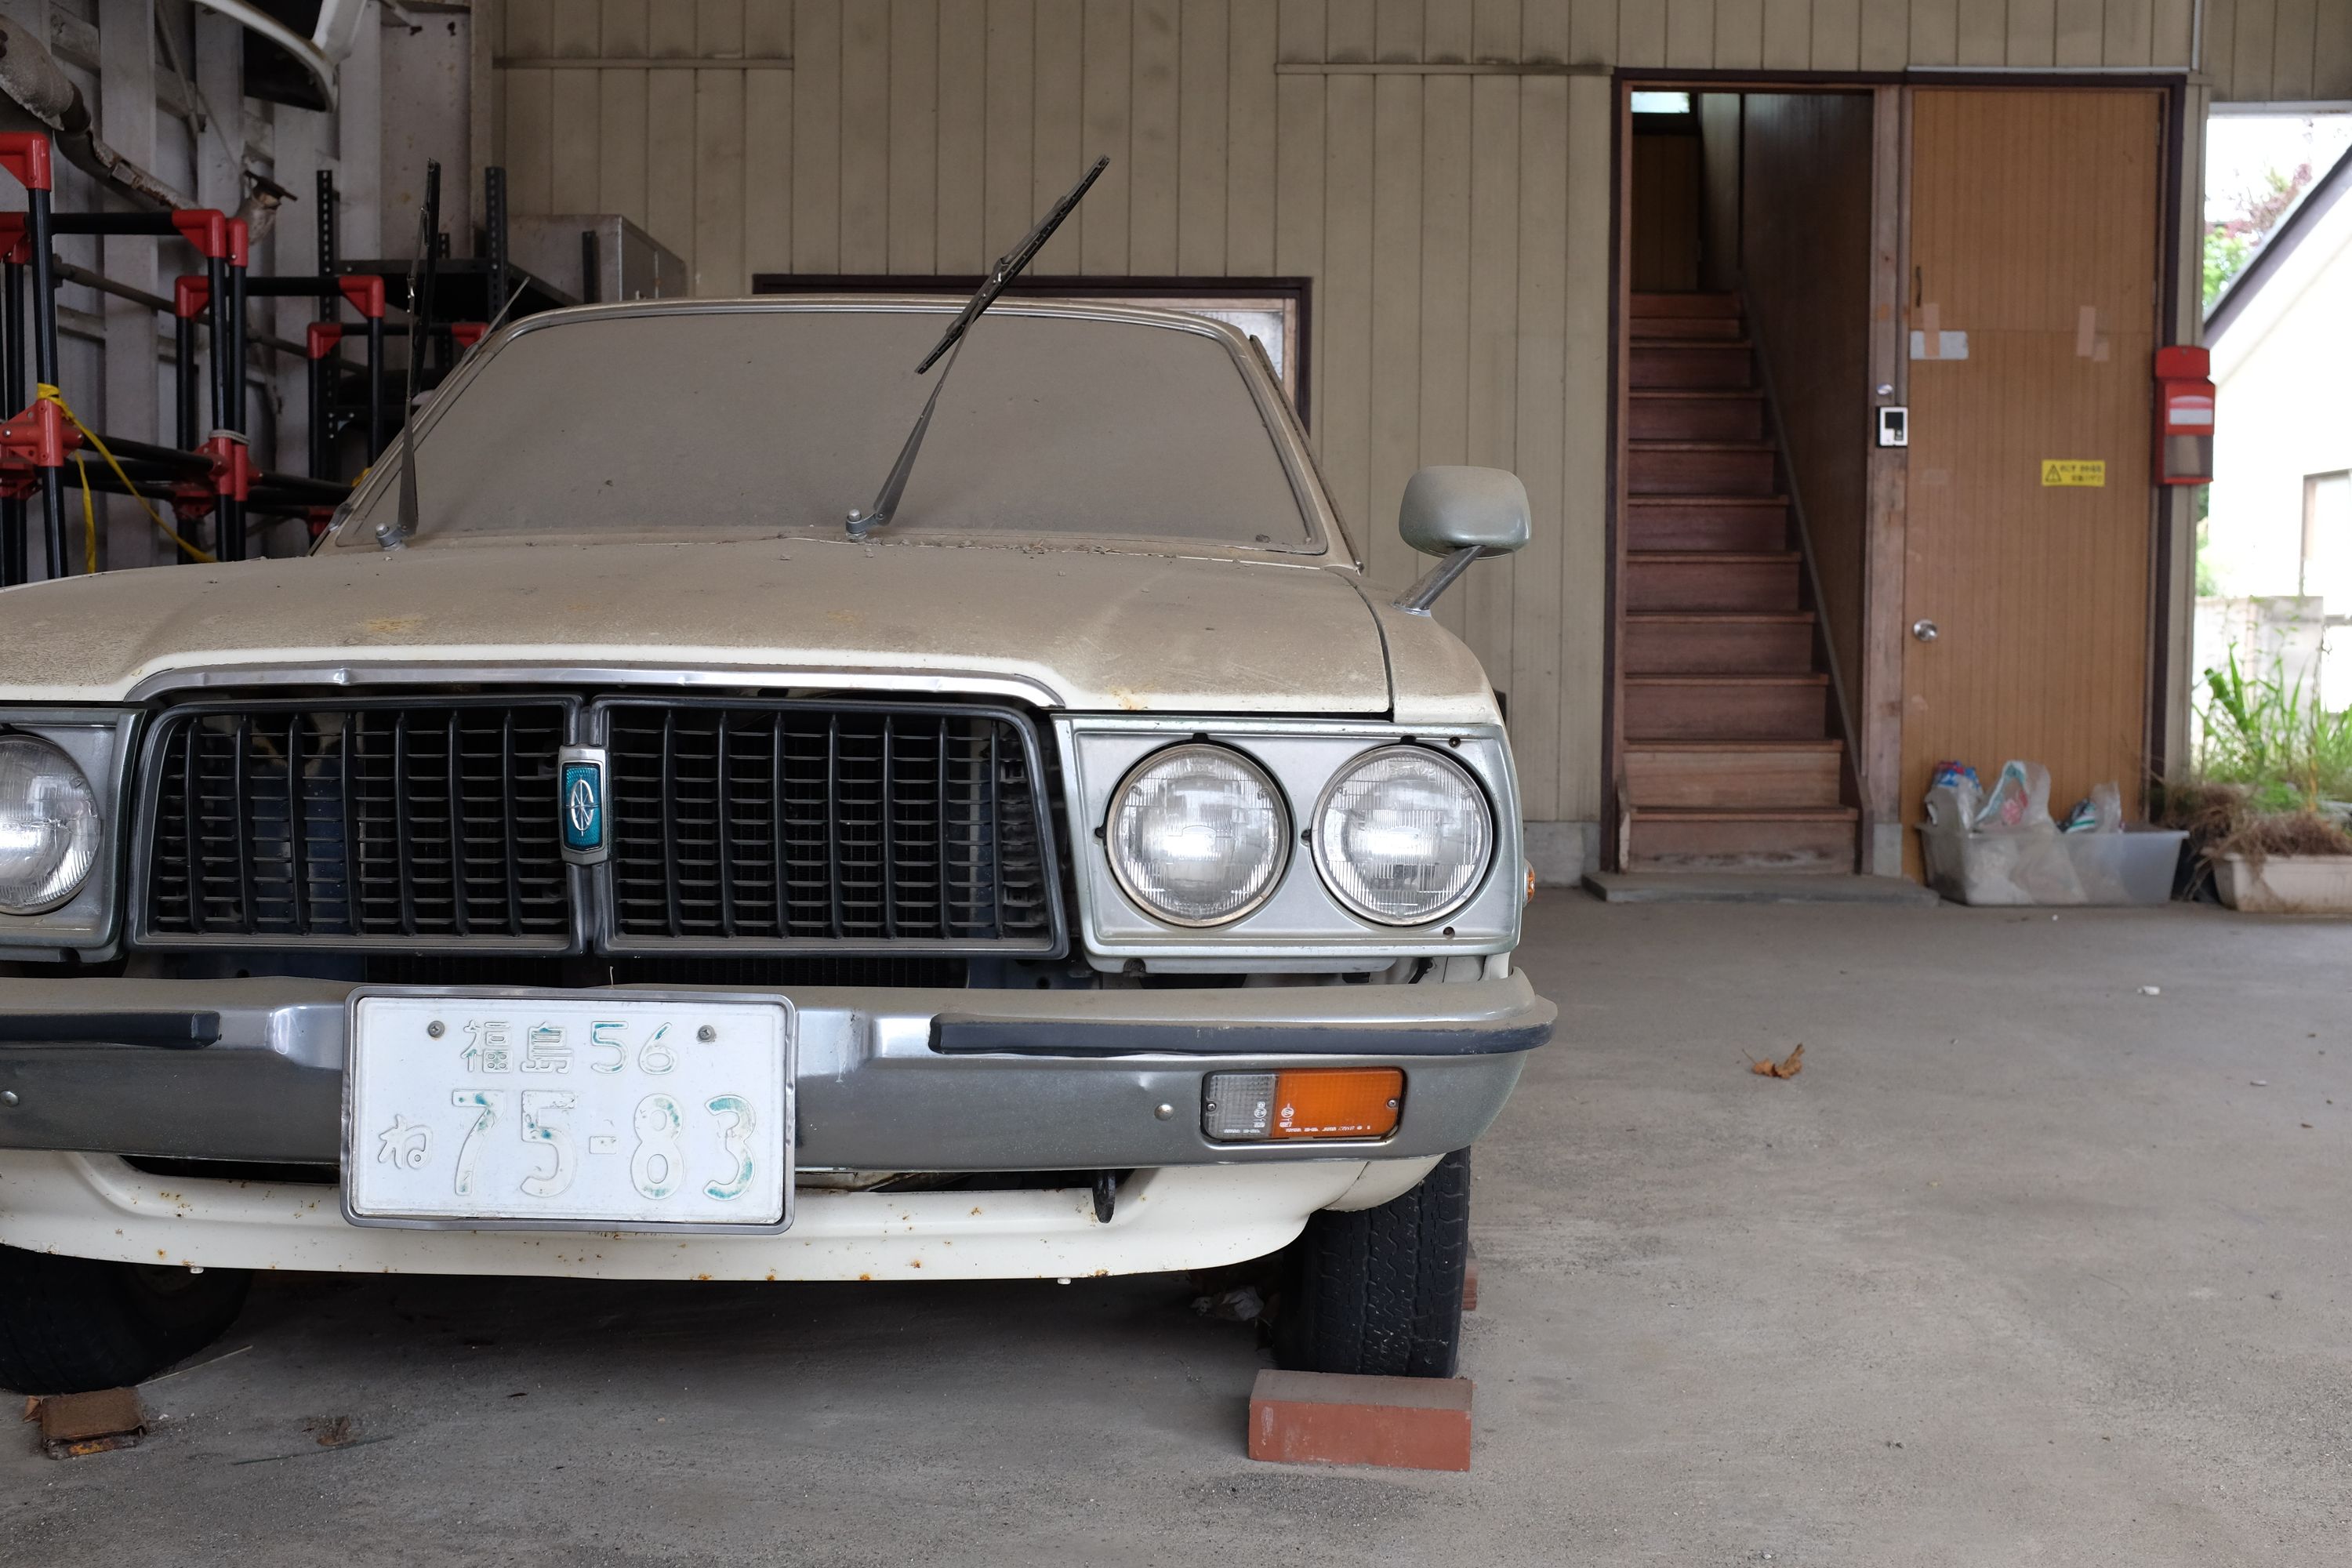 An abandoned vintage Toyota in a garage.